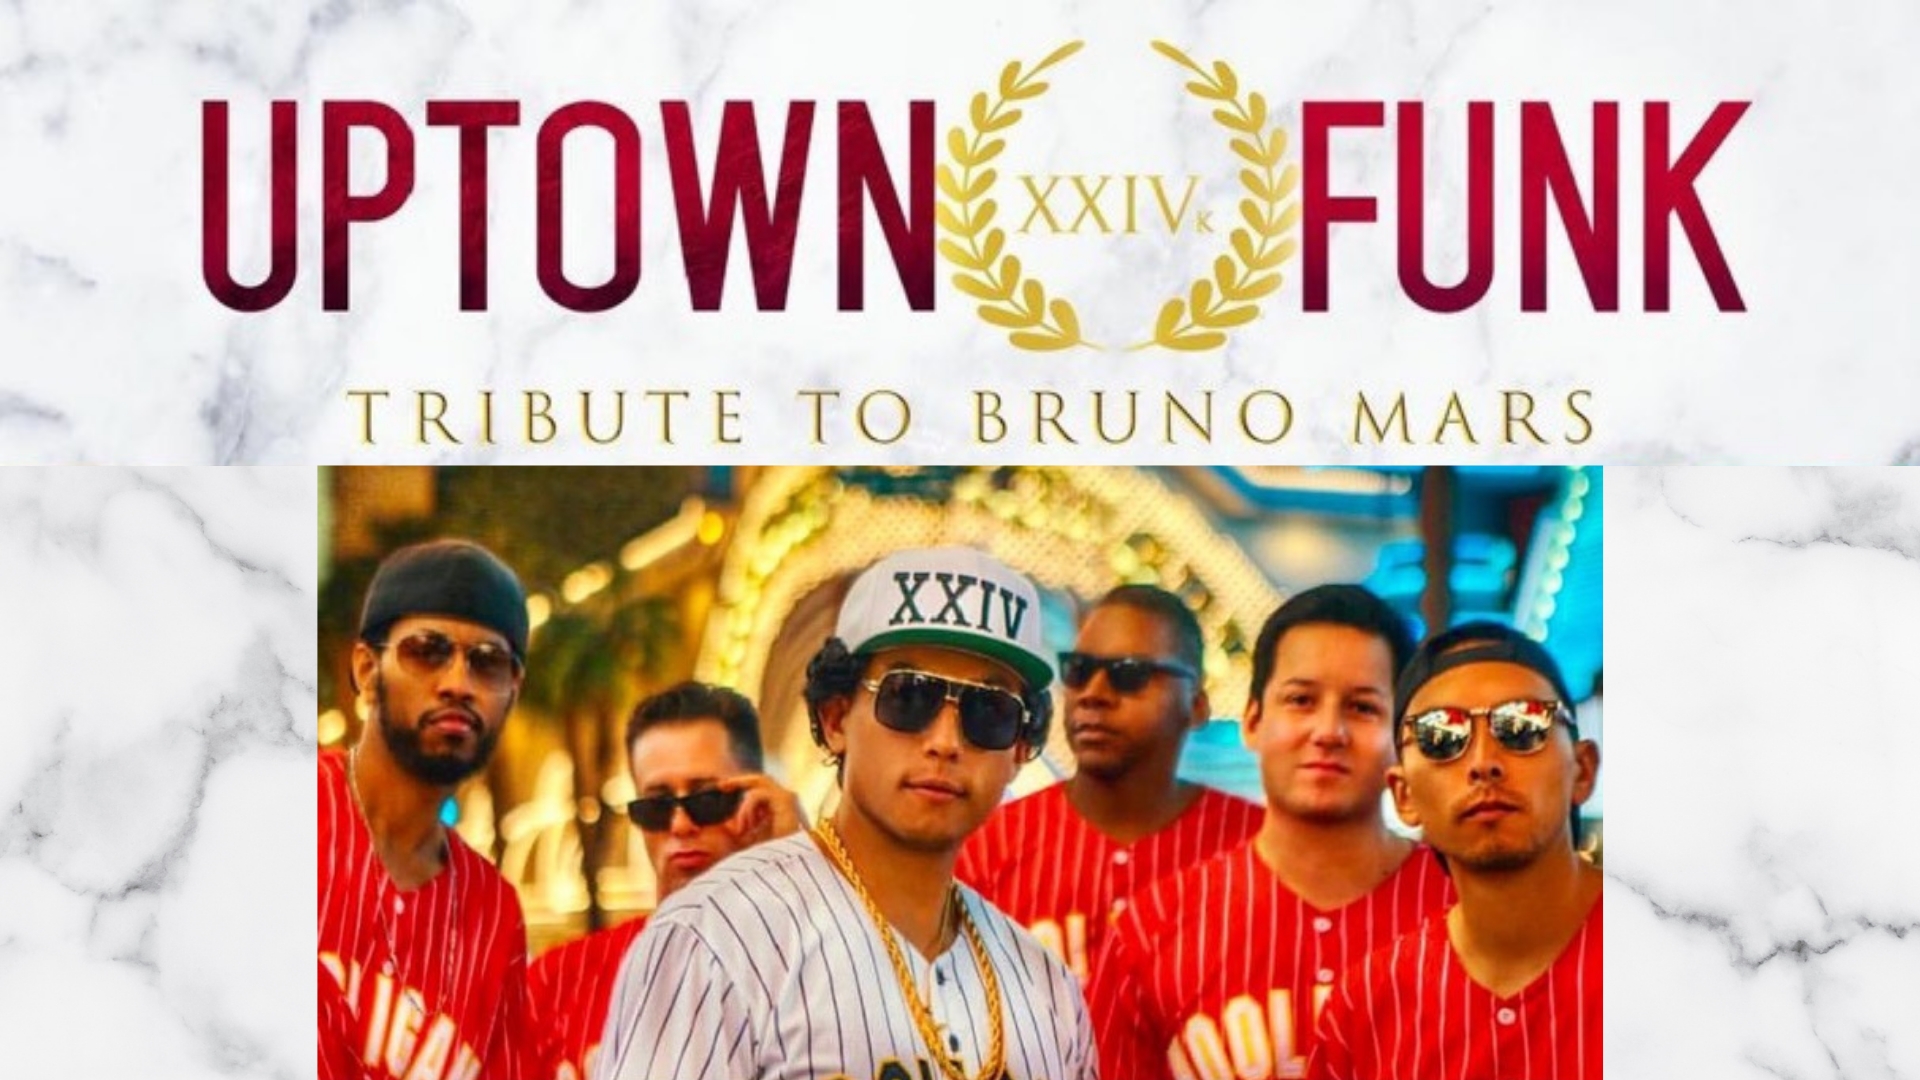 Summer Stage Concert featuring Uptown Funk